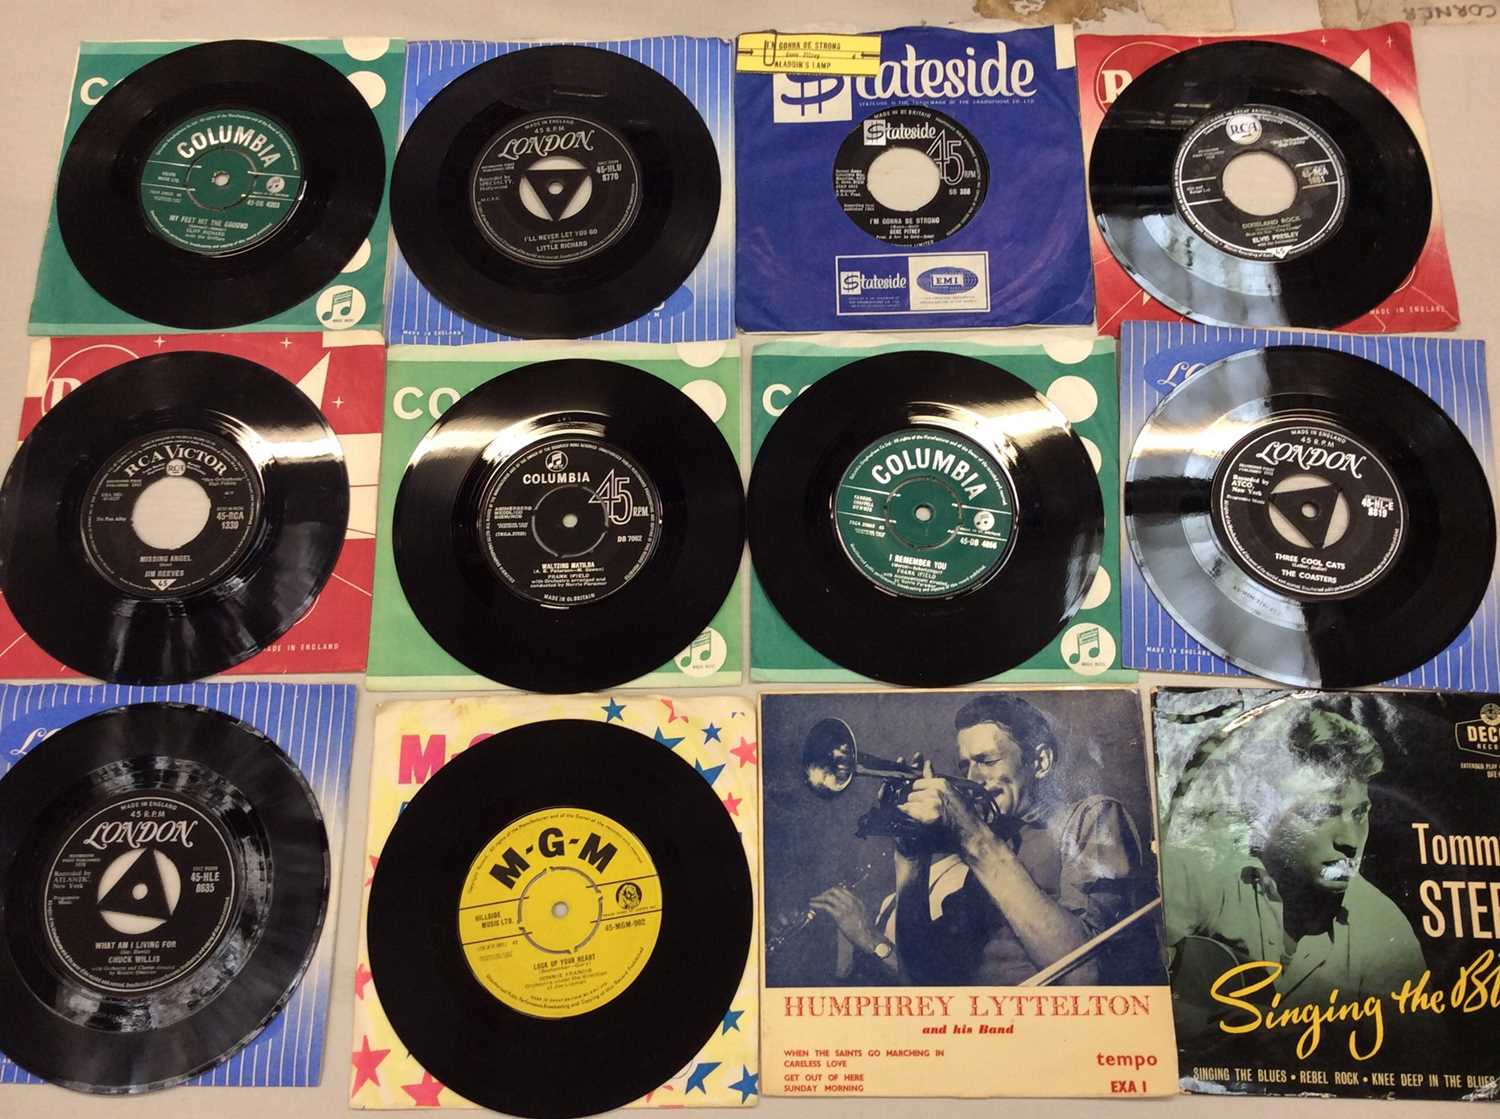 150 plus singles including Cliff Richard and The Drifters, The Essex, Helen Shapiro, Chuck Willis, T